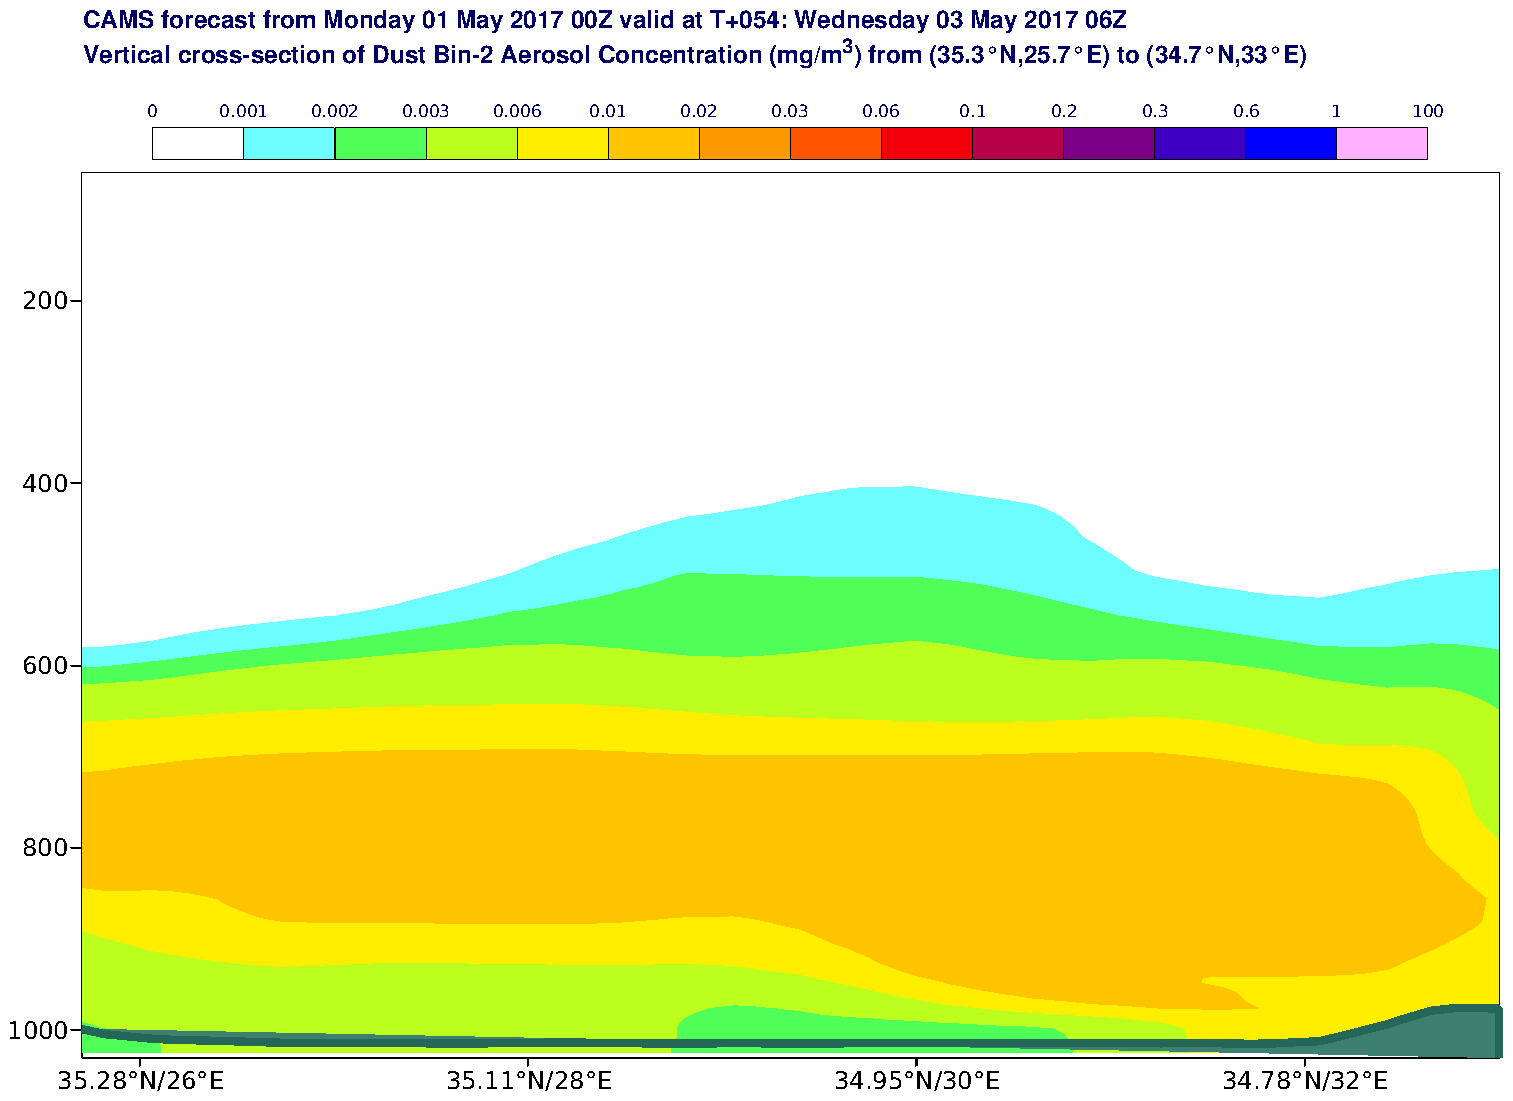 Vertical cross-section of Dust Bin-2 Aerosol Concentration (mg/m3) valid at T54 - 2017-05-03 06:00